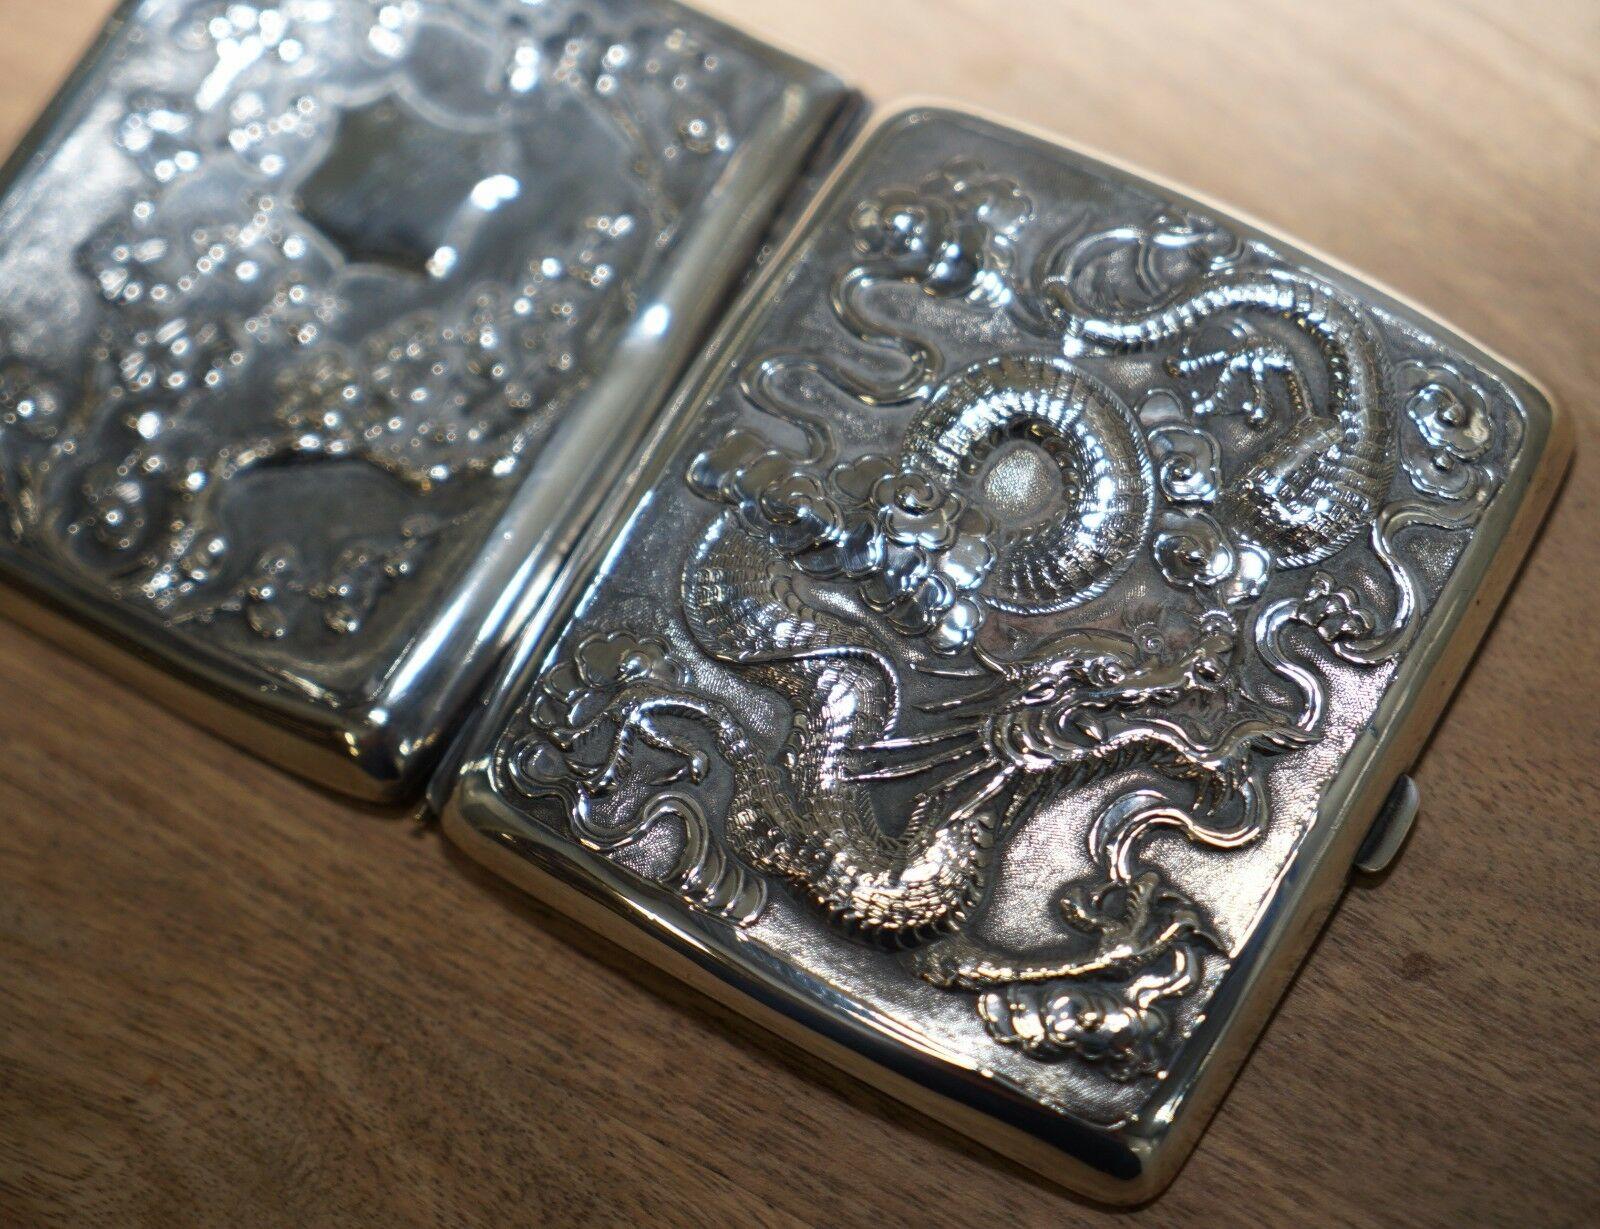 Wimbledon-Furniture

Wimbledon-Furniture is delighted to offer for sale this lovely solid silver Meiji period circa 1870 dragon embossed cigarette case with gold gilt internals

If you’re looking at this piece then you know exactly what it is, it’s